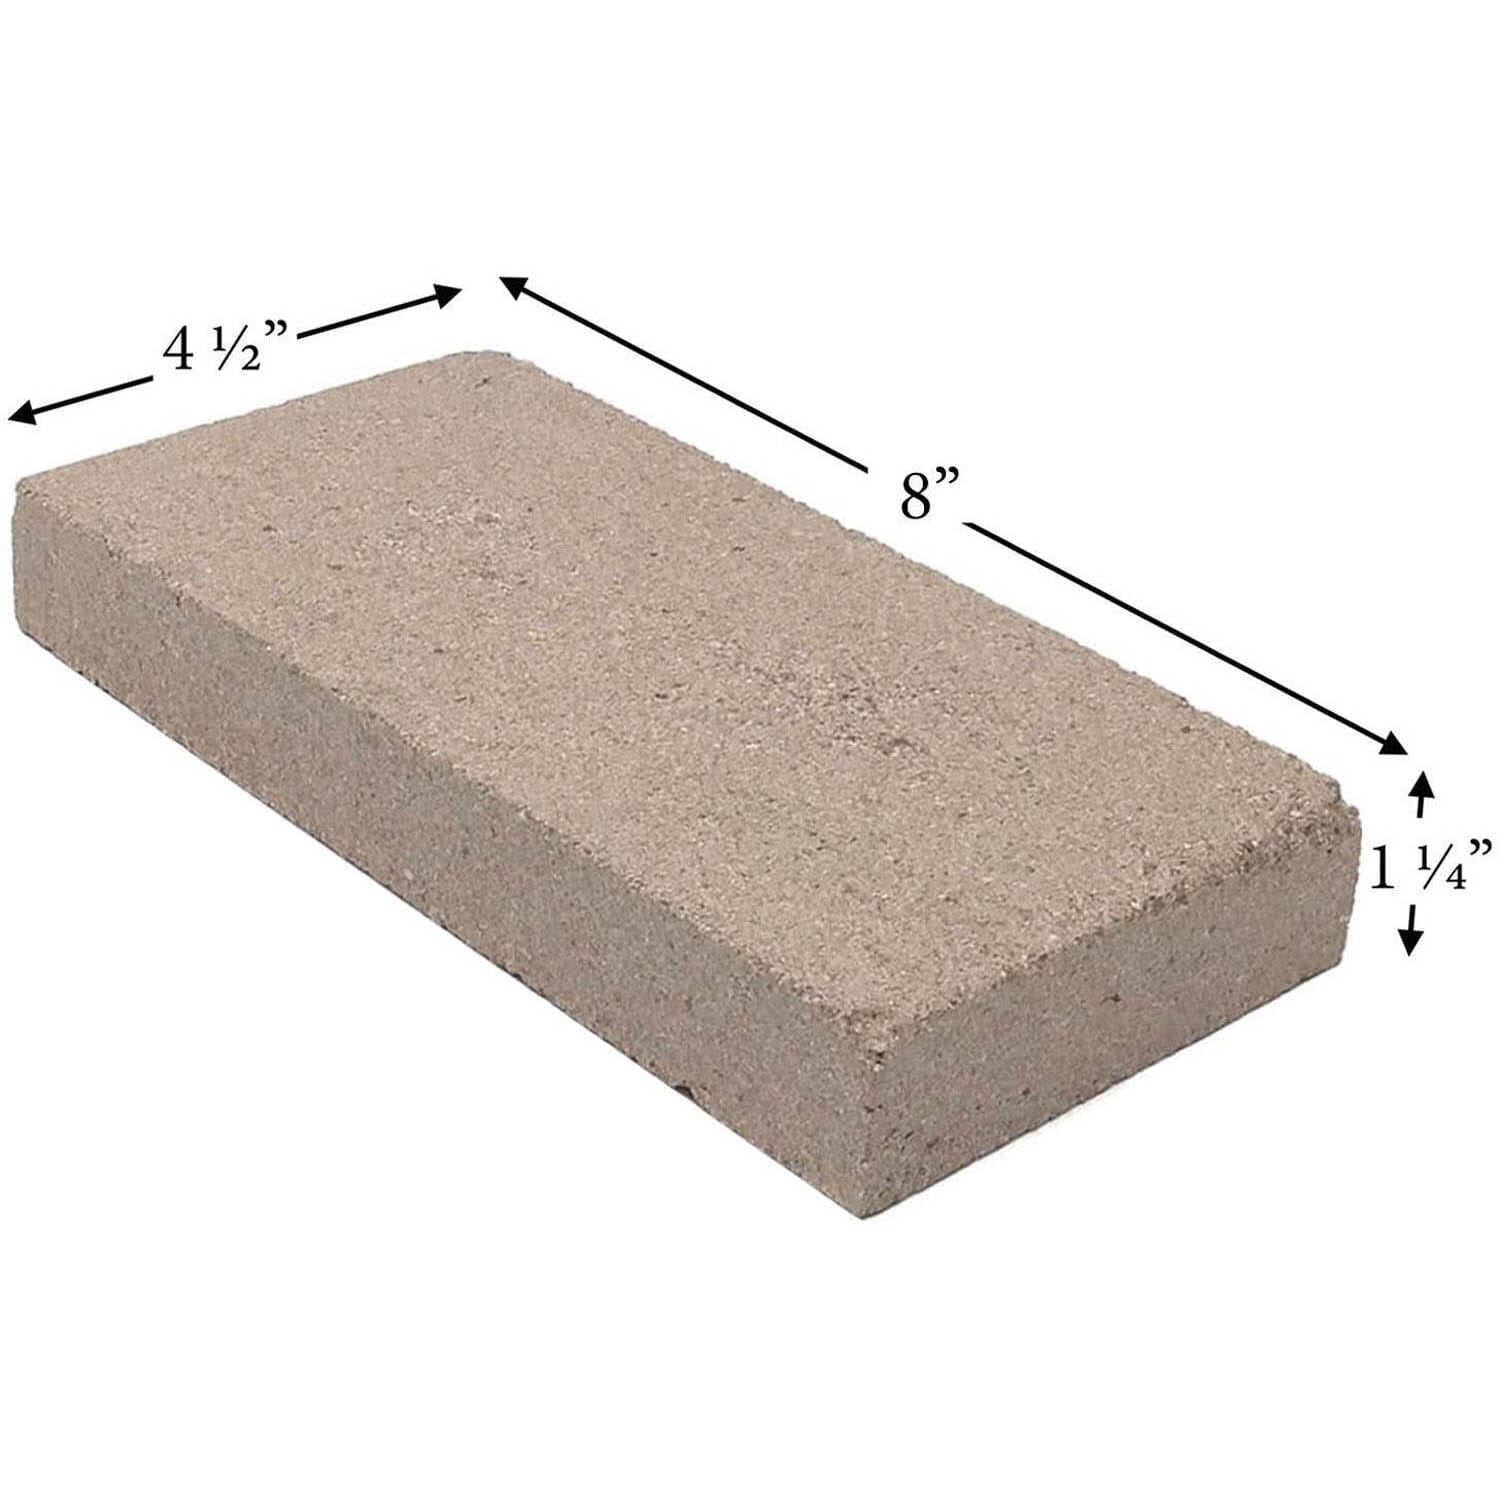 Pumice Firebrick For Stoves and Fireplaces (8 x 4.5 x 1.25”)  PUMICE-BRICK-83